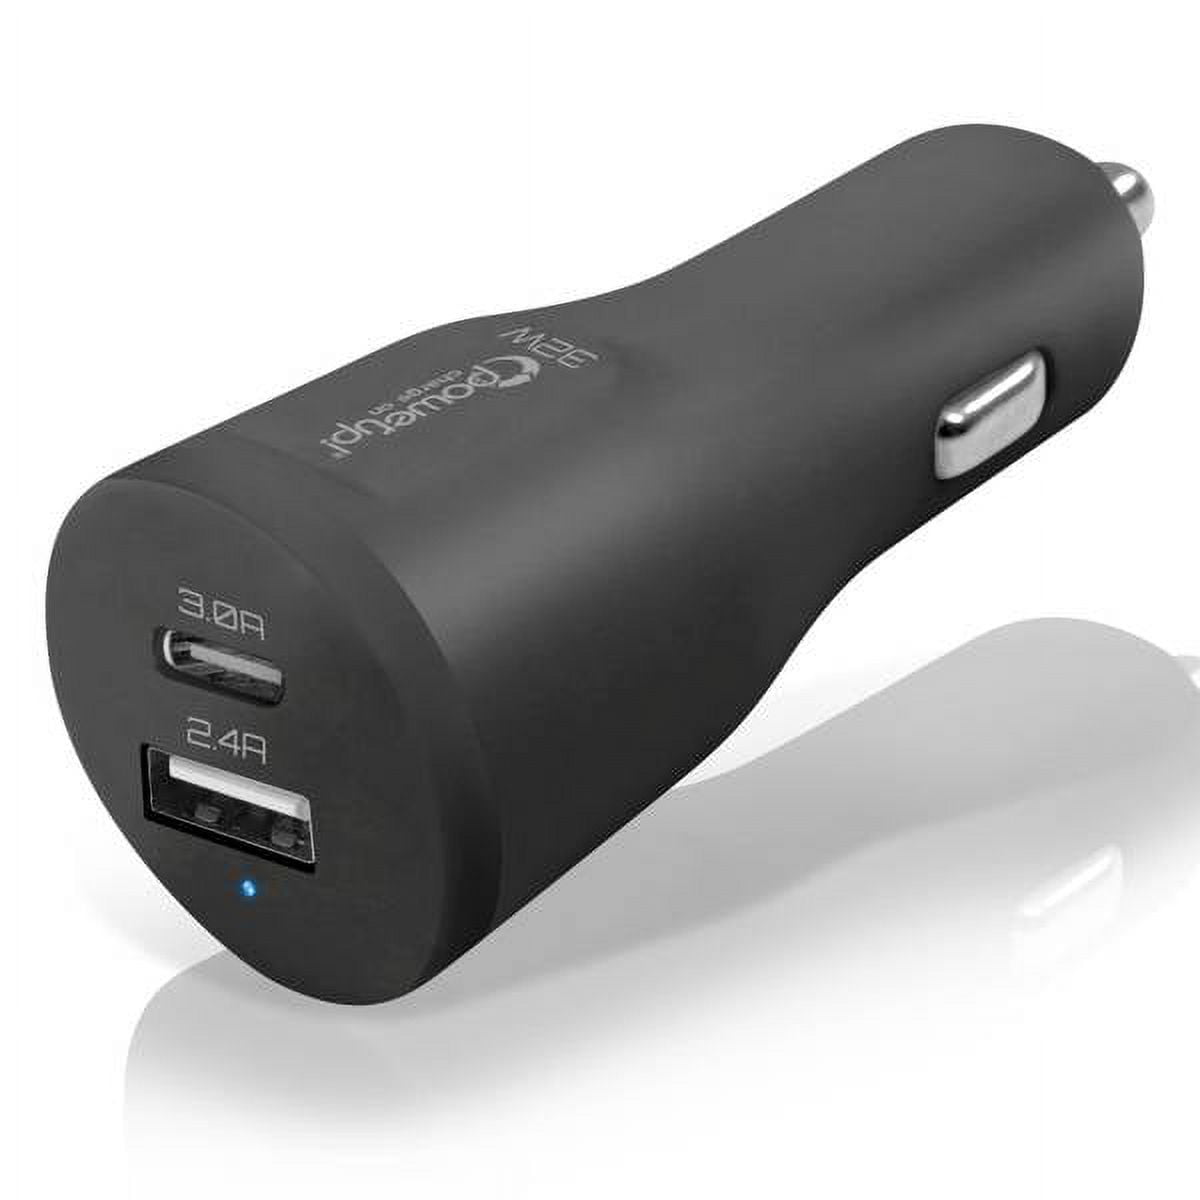 New 12 24v 4.8a Dual Usb Car Charger 2 Ports Lcd Display Fast Car Charger  Cigarette Socket Lighter Power Adapter Car Styling From Skywhite, $9.33